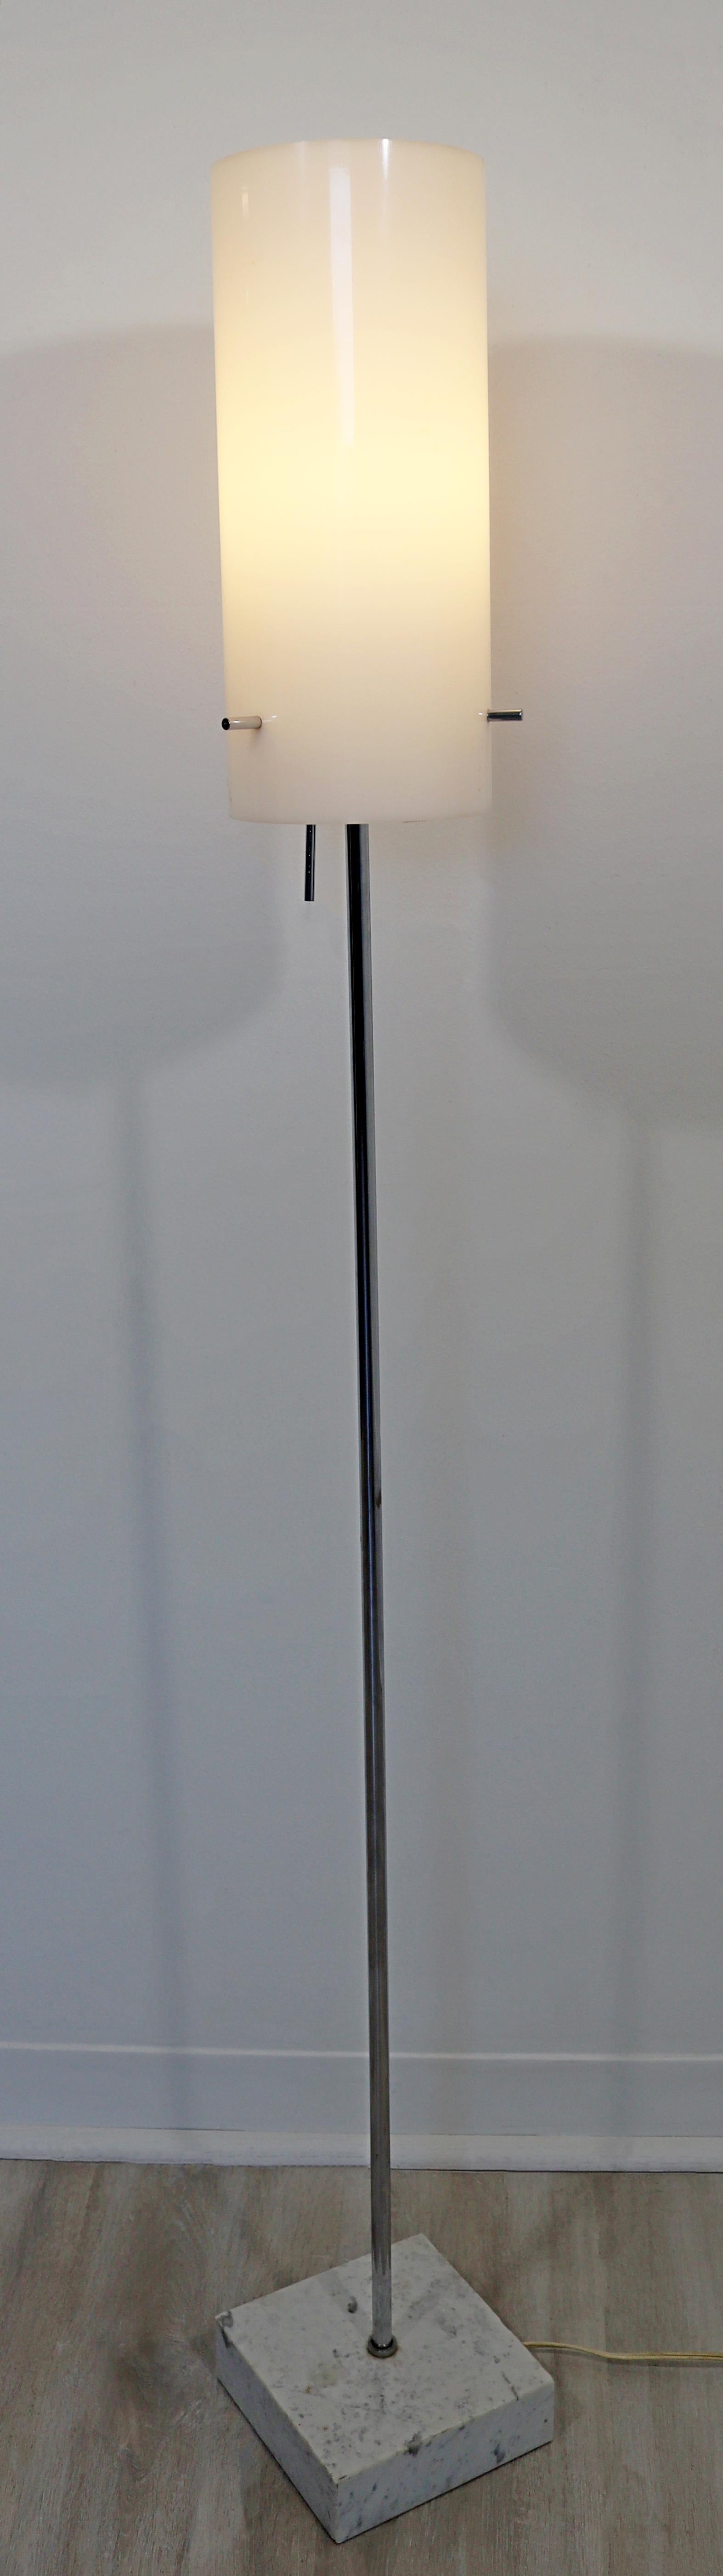 For your consideration is a fabulous, chrome and frosted acrylic, tube floor lamp, on a white marble base, by Paul Mayen, circa the 1960s. In excellent vintage condition. The dimensions are 6.5